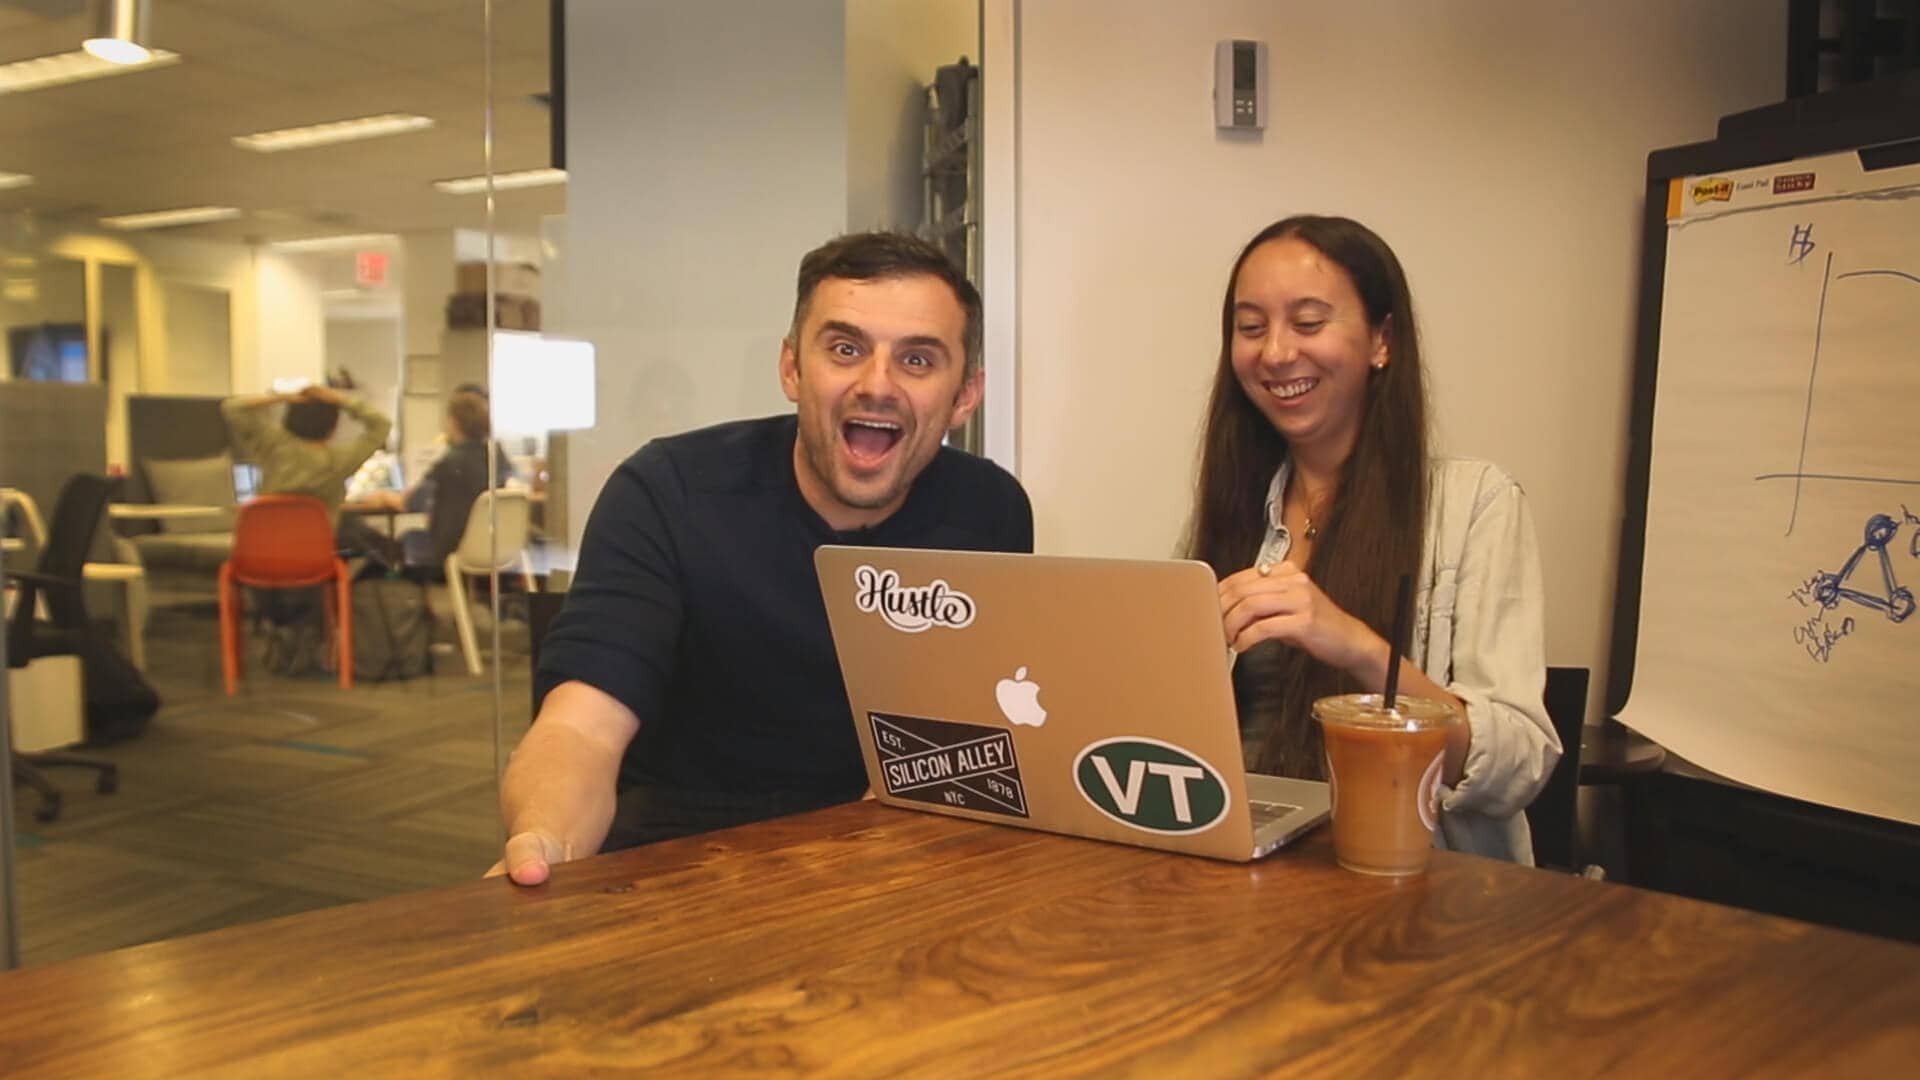 #AskGaryVee Episode 152: Competing with Elon Musk & Hulu Subscriptions